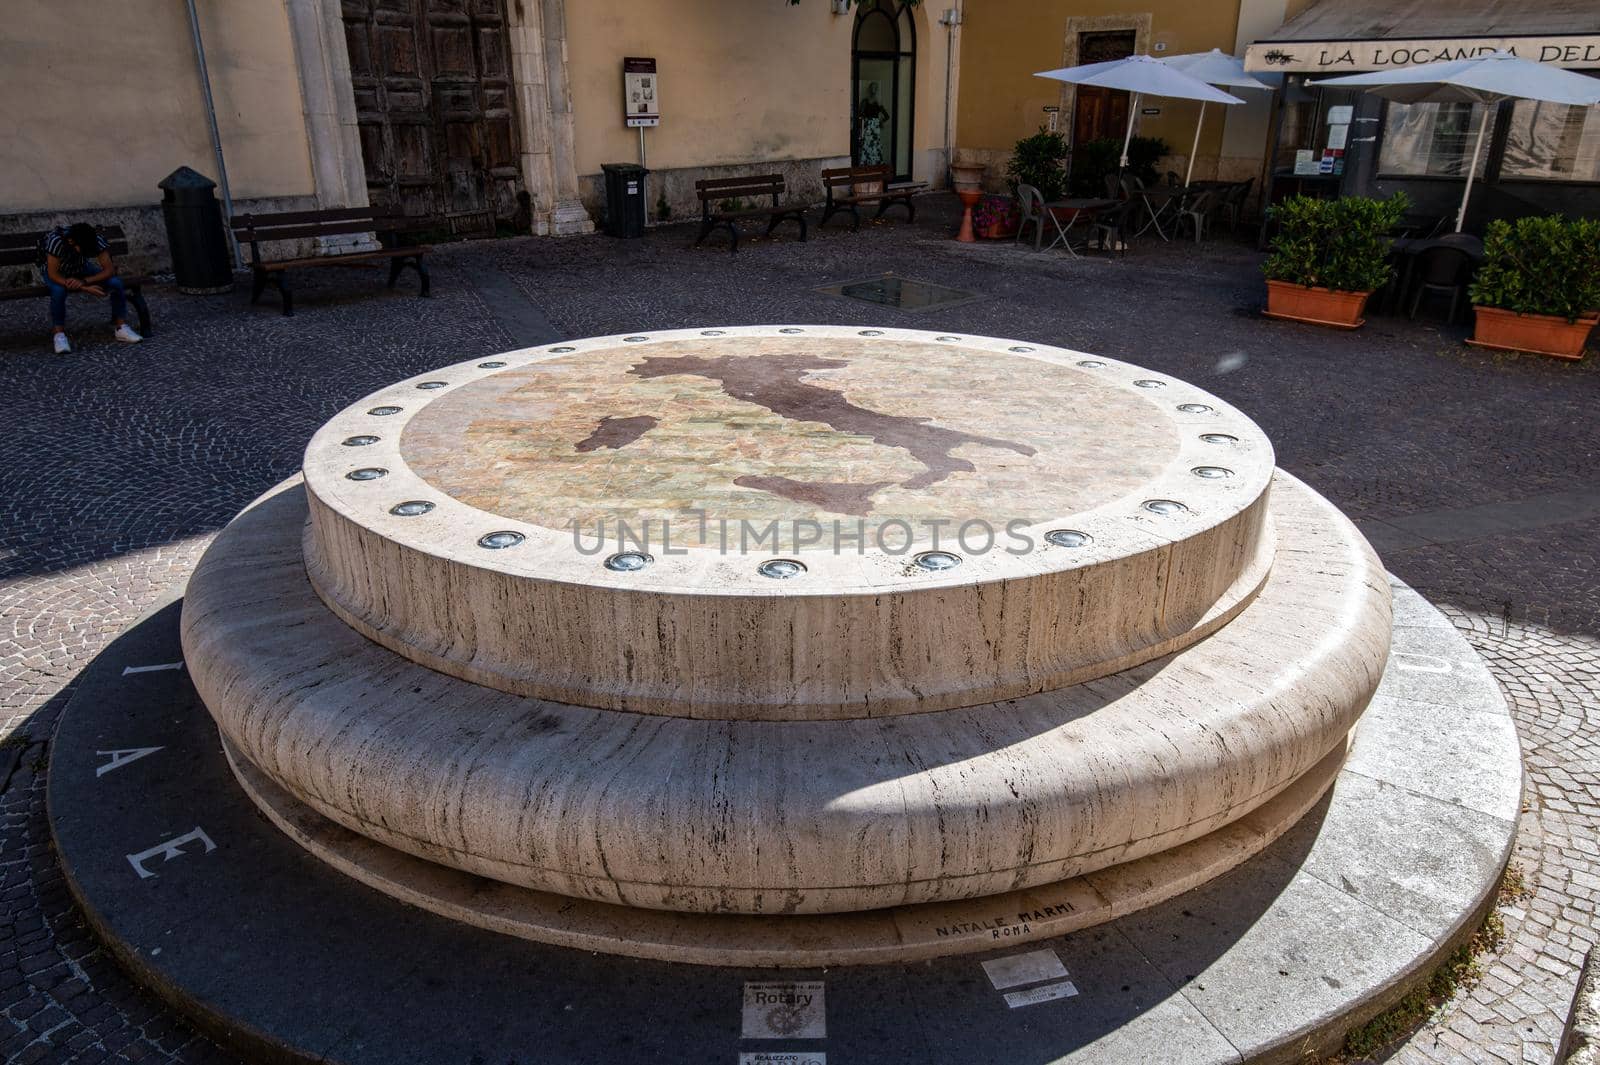 rieti monument of the geographic center of italy by carfedeph